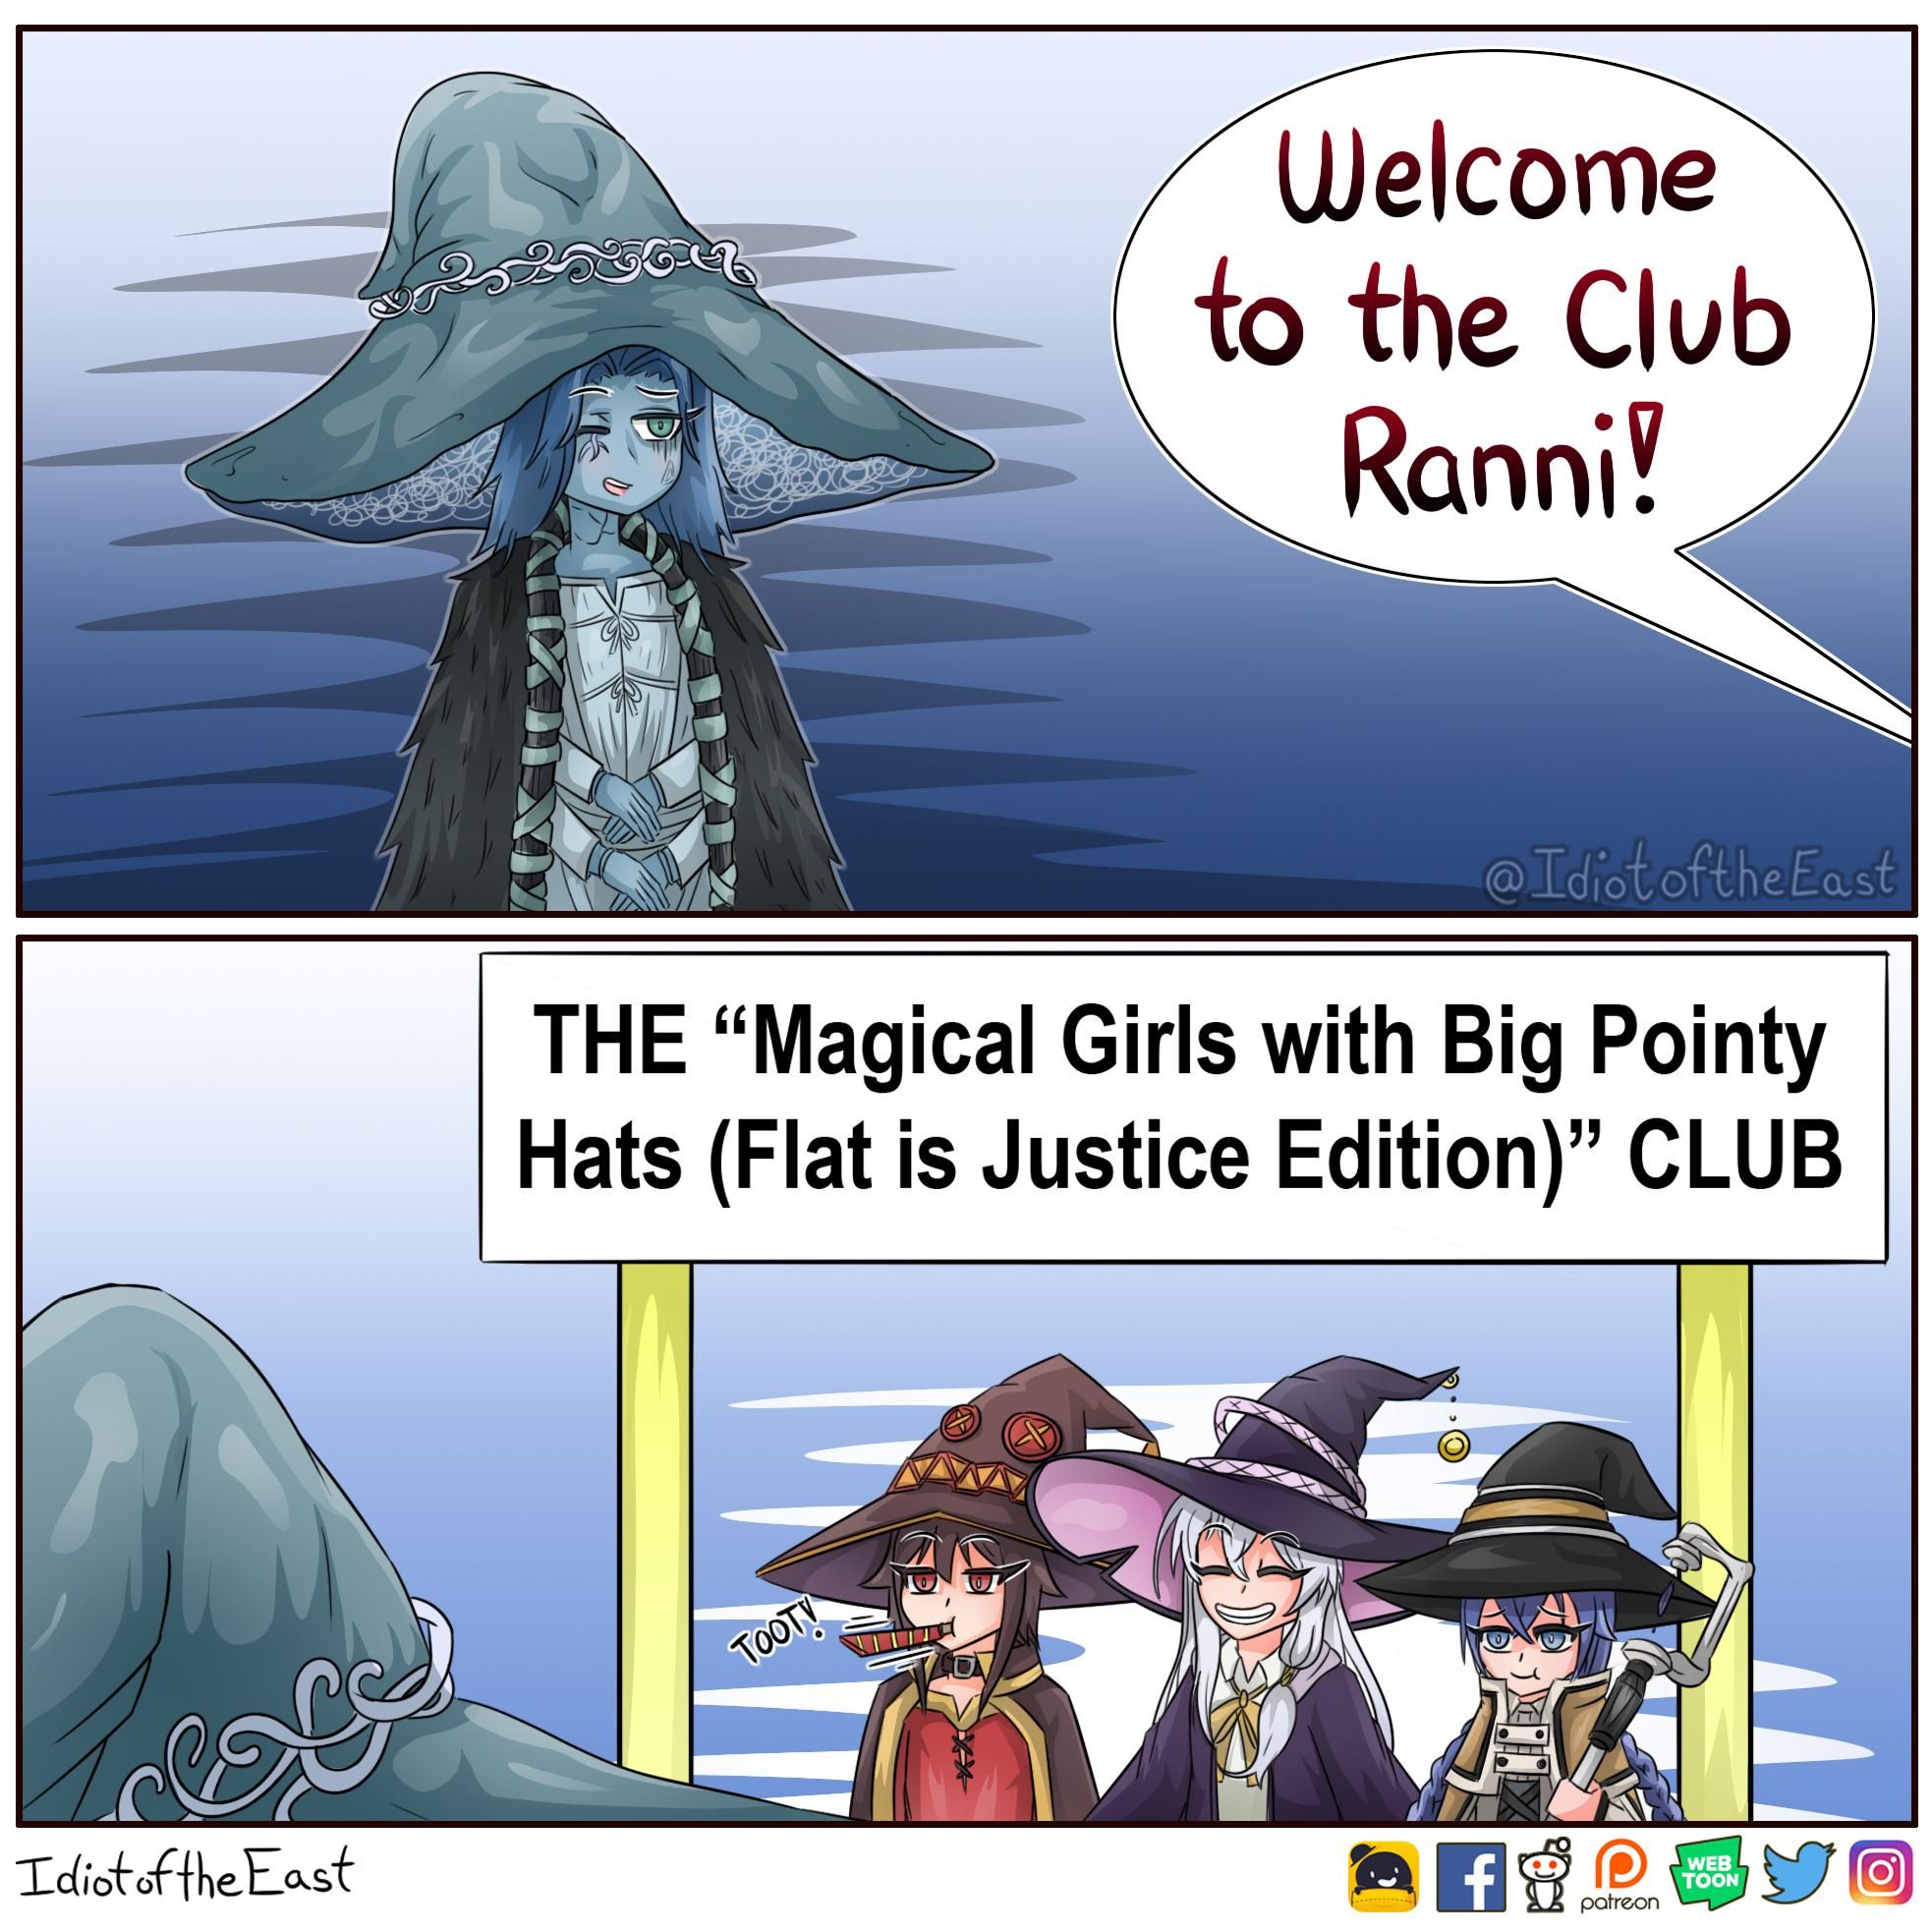 Ranni from Elden Ring and her anime club mates